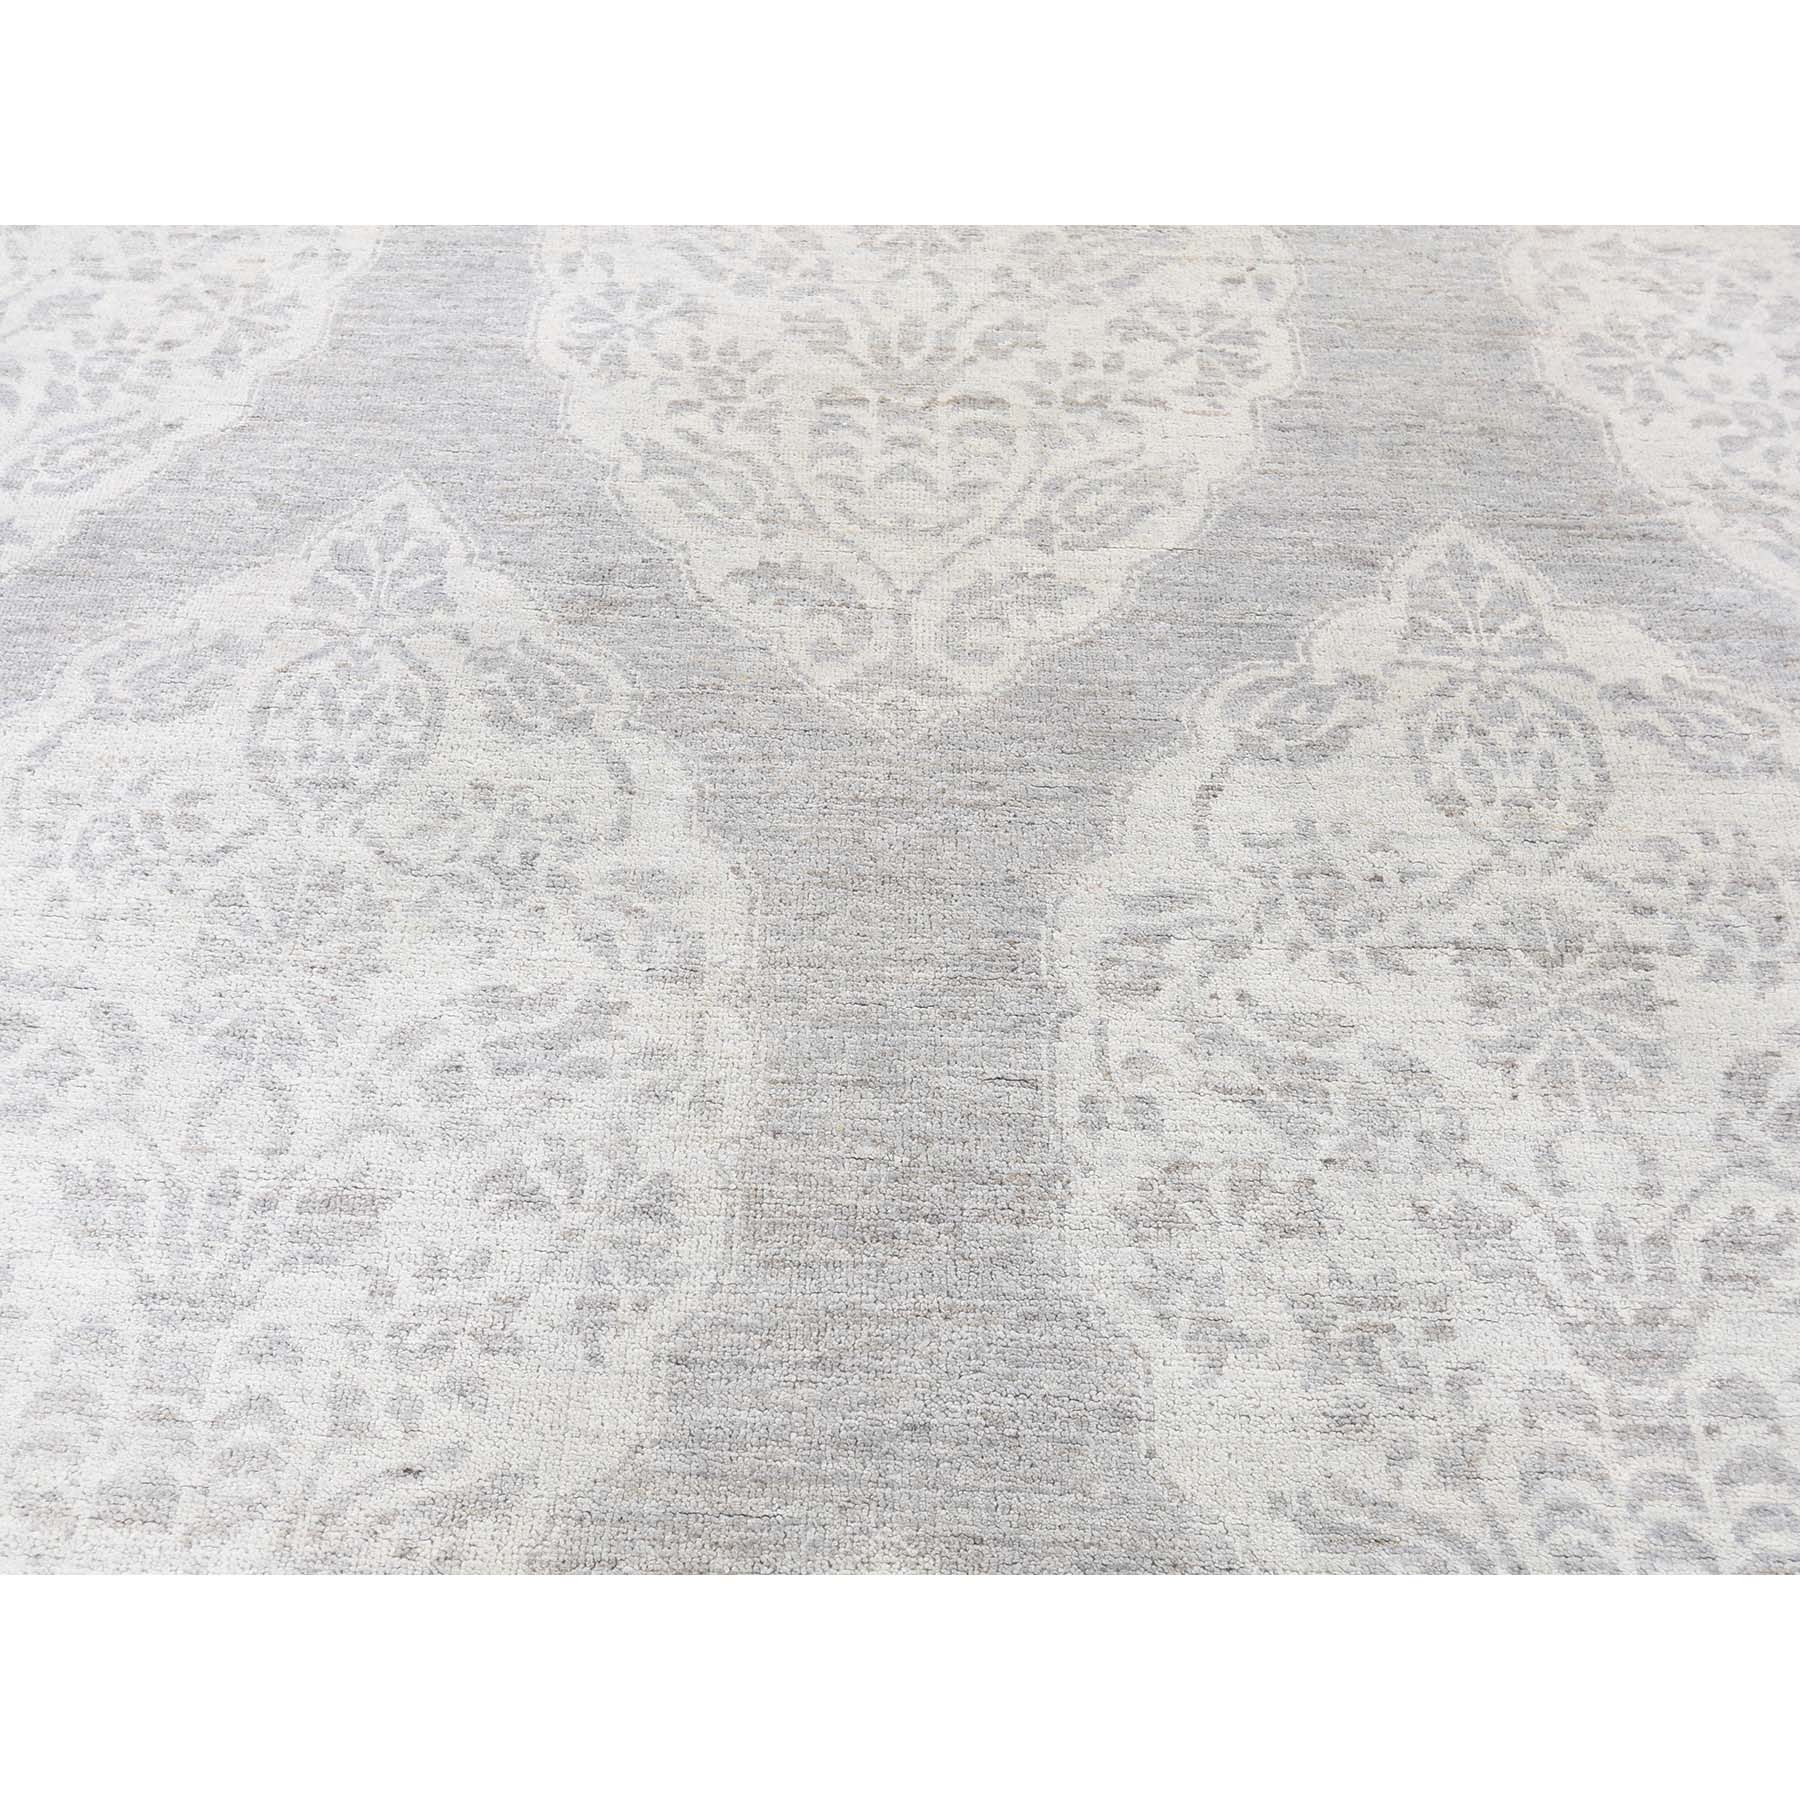 8-8 x13-4  Long And Narrow Peshawar Flower Design Grey Hand-Knotted Oriental Rug 